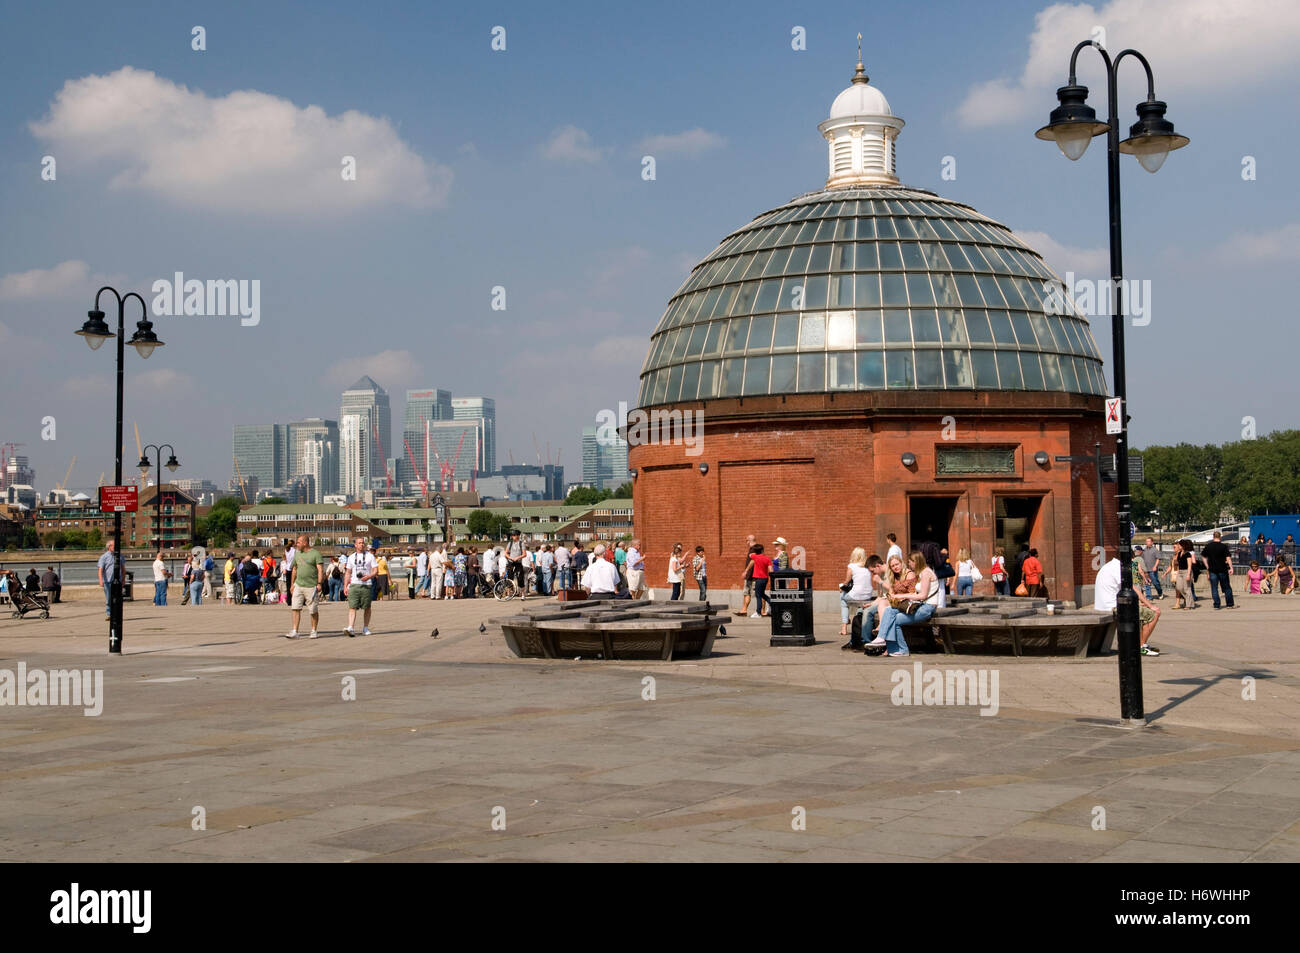 Entrance to the Thames Tunnel and view to the Docklands, Greenwich, London, England, United Kingdom, Europe Stock Photo